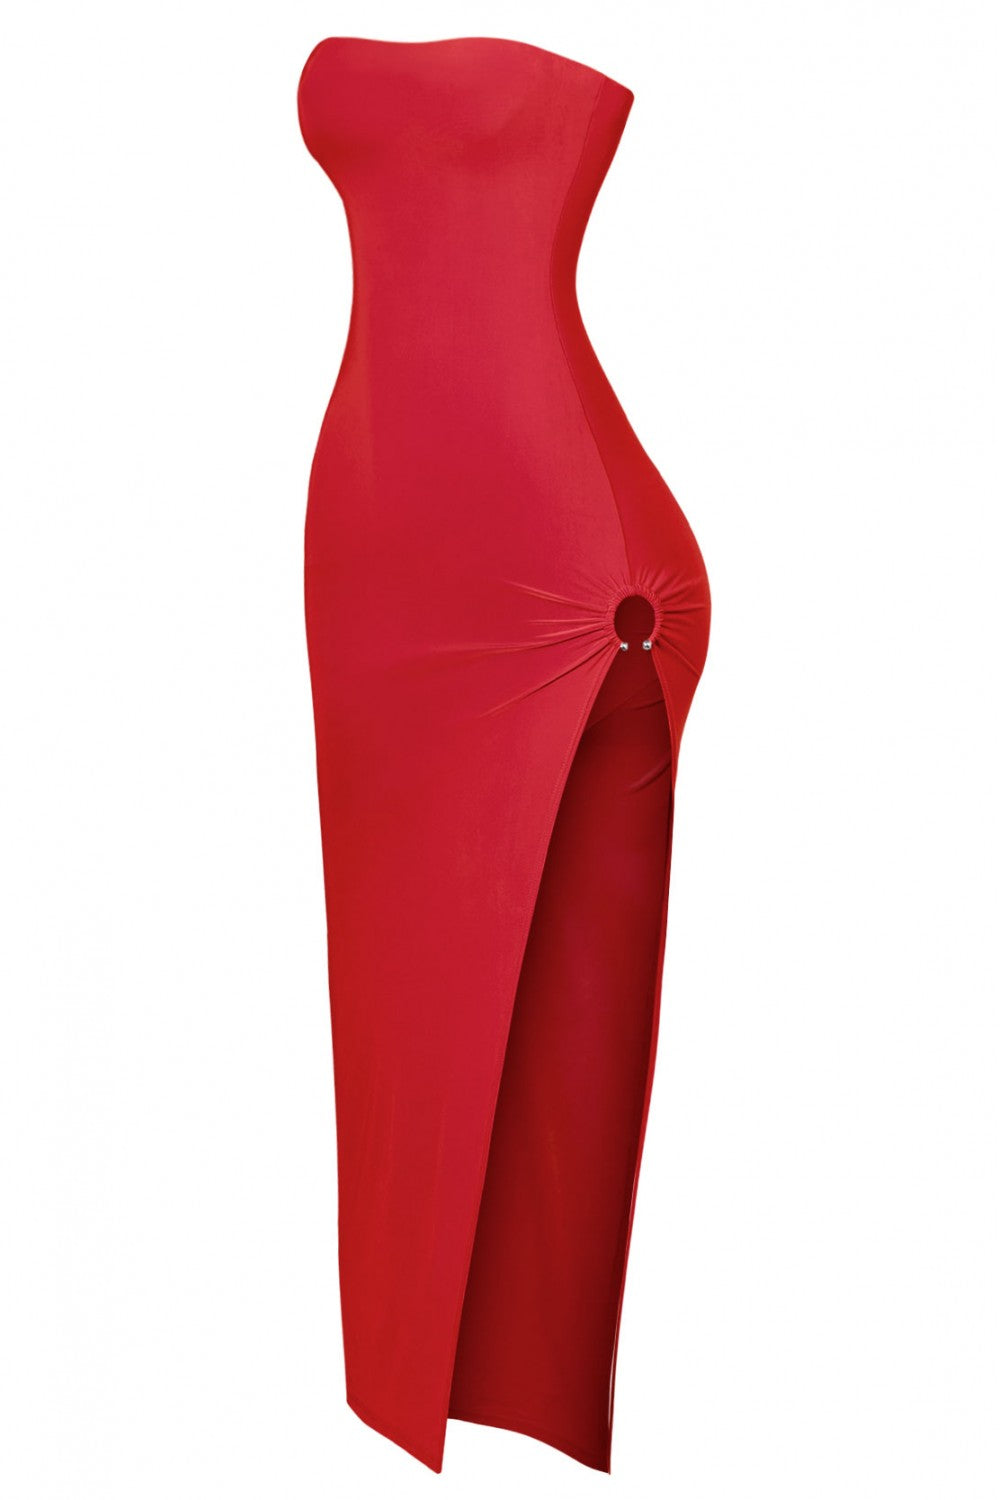 Ya No Me Quieres Thigh High Slit Maxi Tube Dress (Red) - Style Baby OMG Fashion Boutique - Stylebabyomg - Buy - Aesthetic Baddie Outfits - Babyboo - OOTD - Shie 